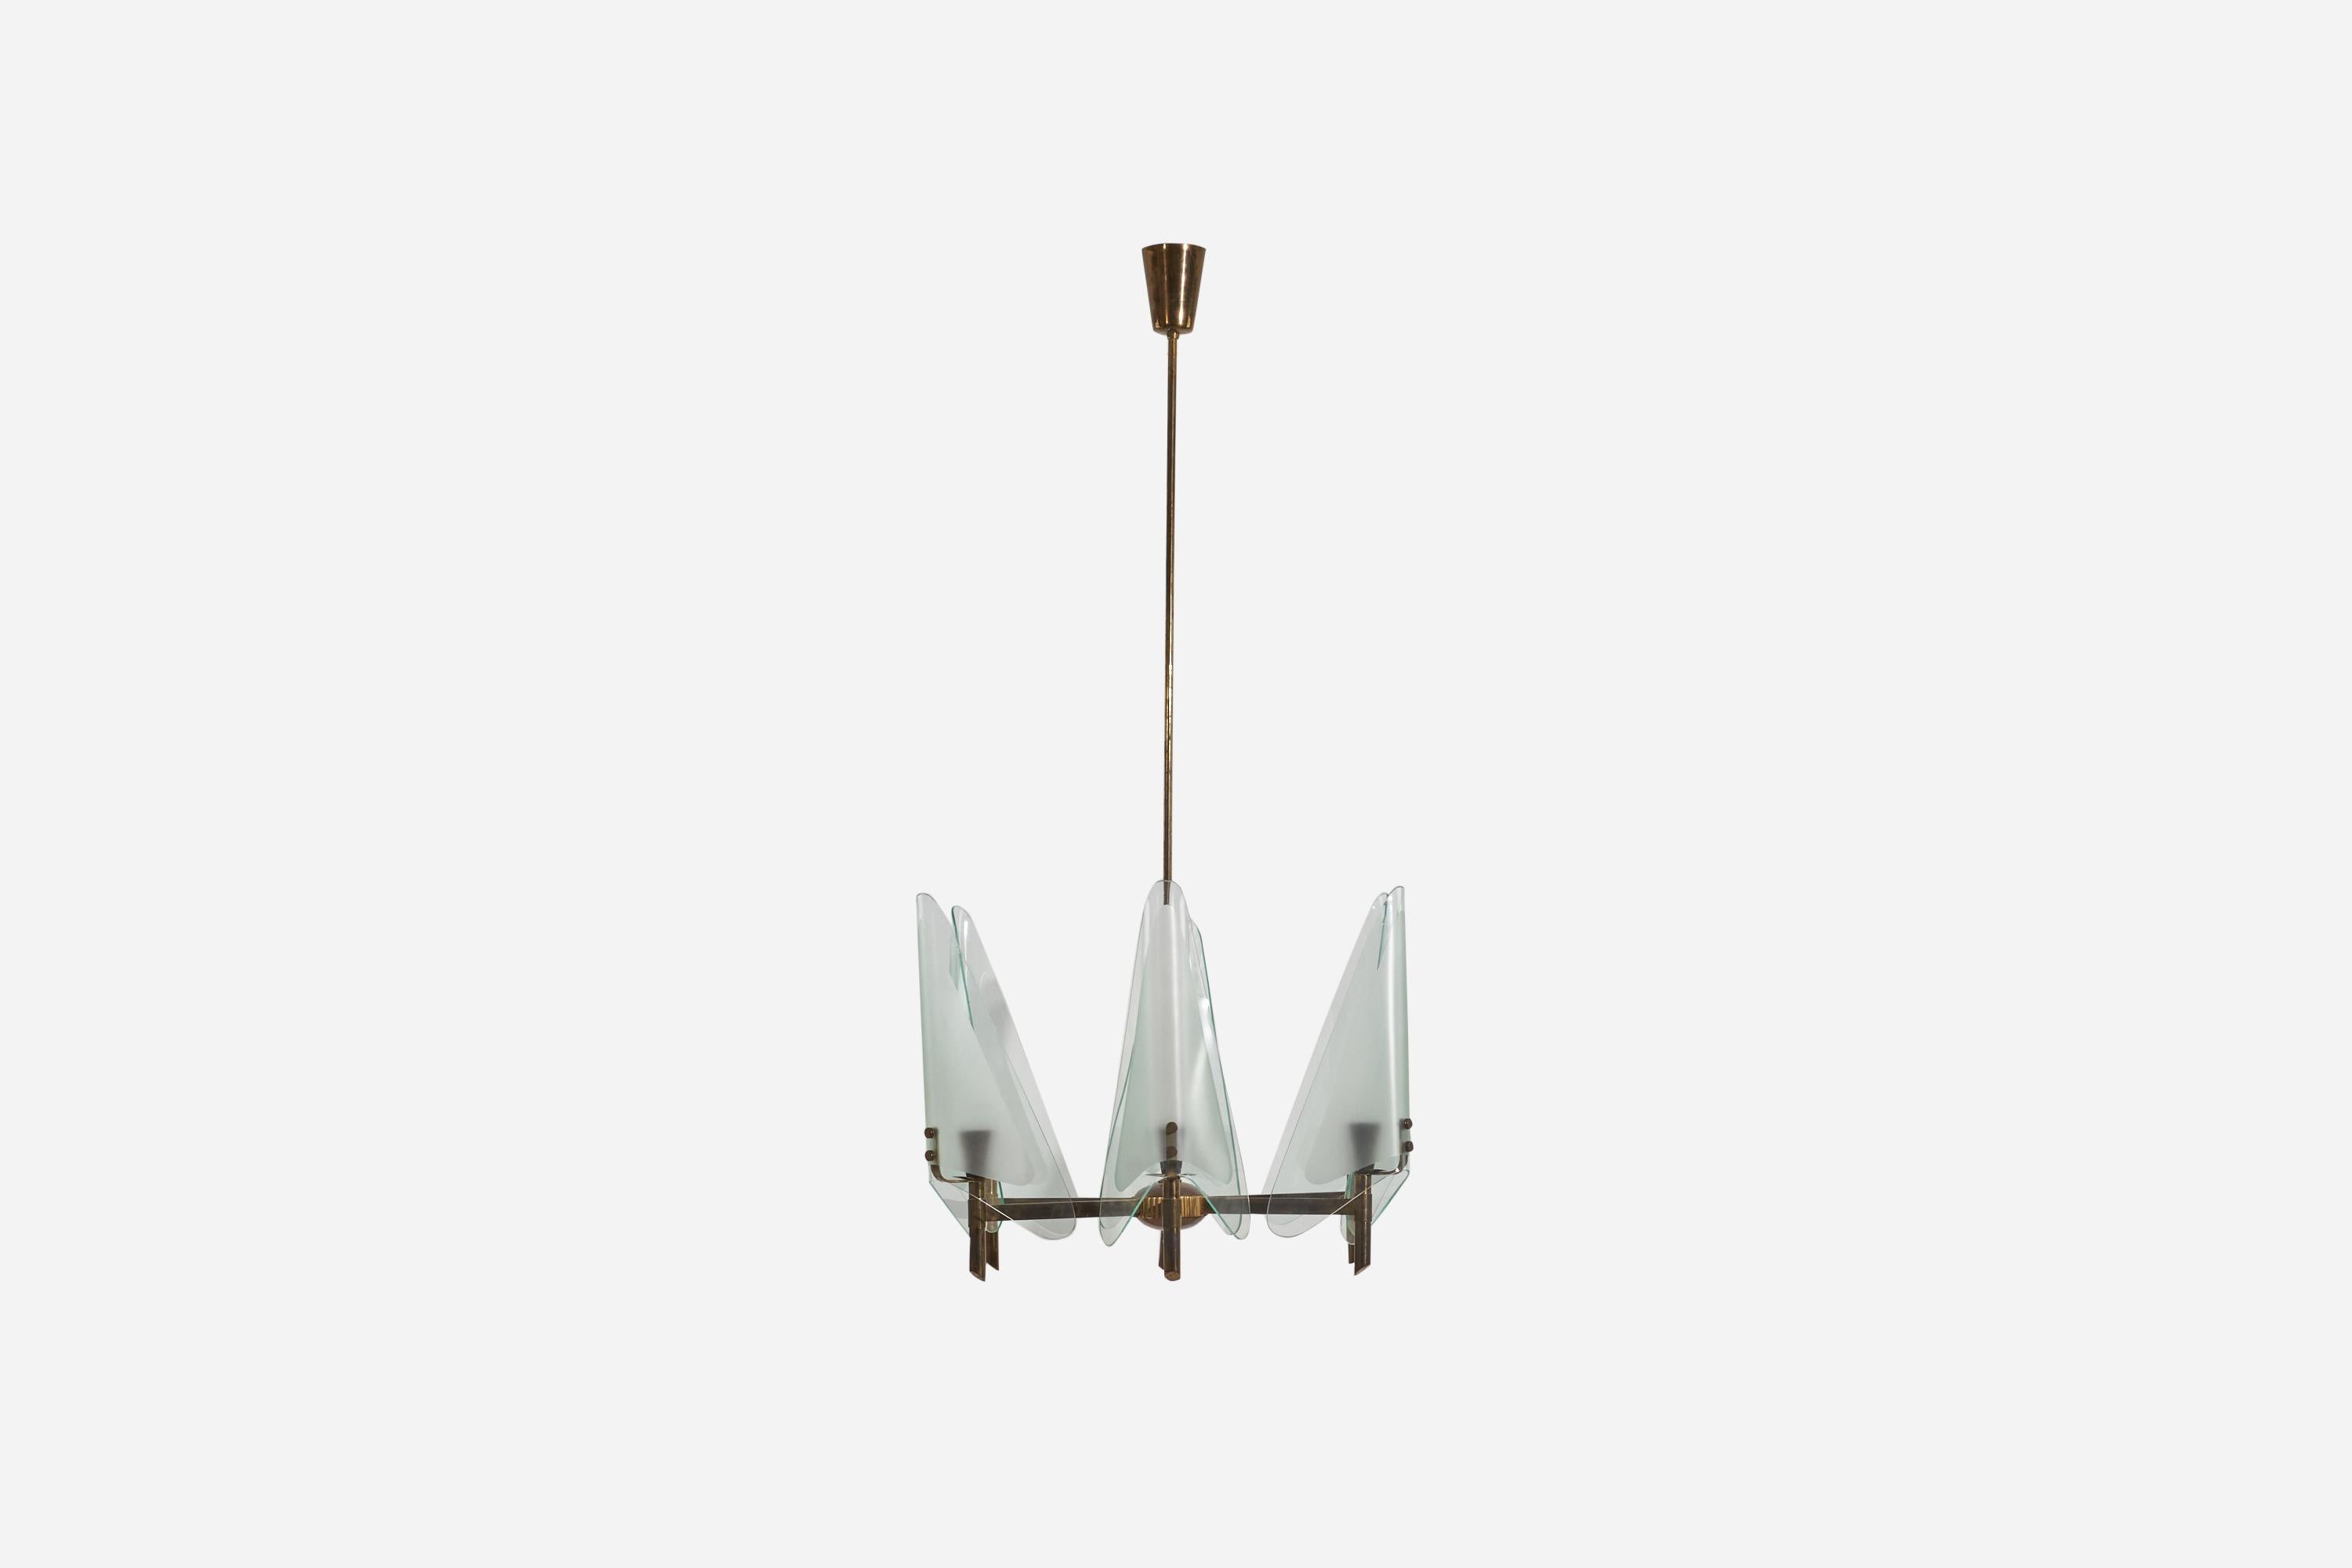 A brass and glass chandelier designed and produced in Italy, 1950s.

Socket takes E-14 bulb.

There is no maximum wattage stated on the fixture.

Dimensions of Canopy (inches) : 3.72 x 2.9 x 2.9 (Height x Width x Depth).